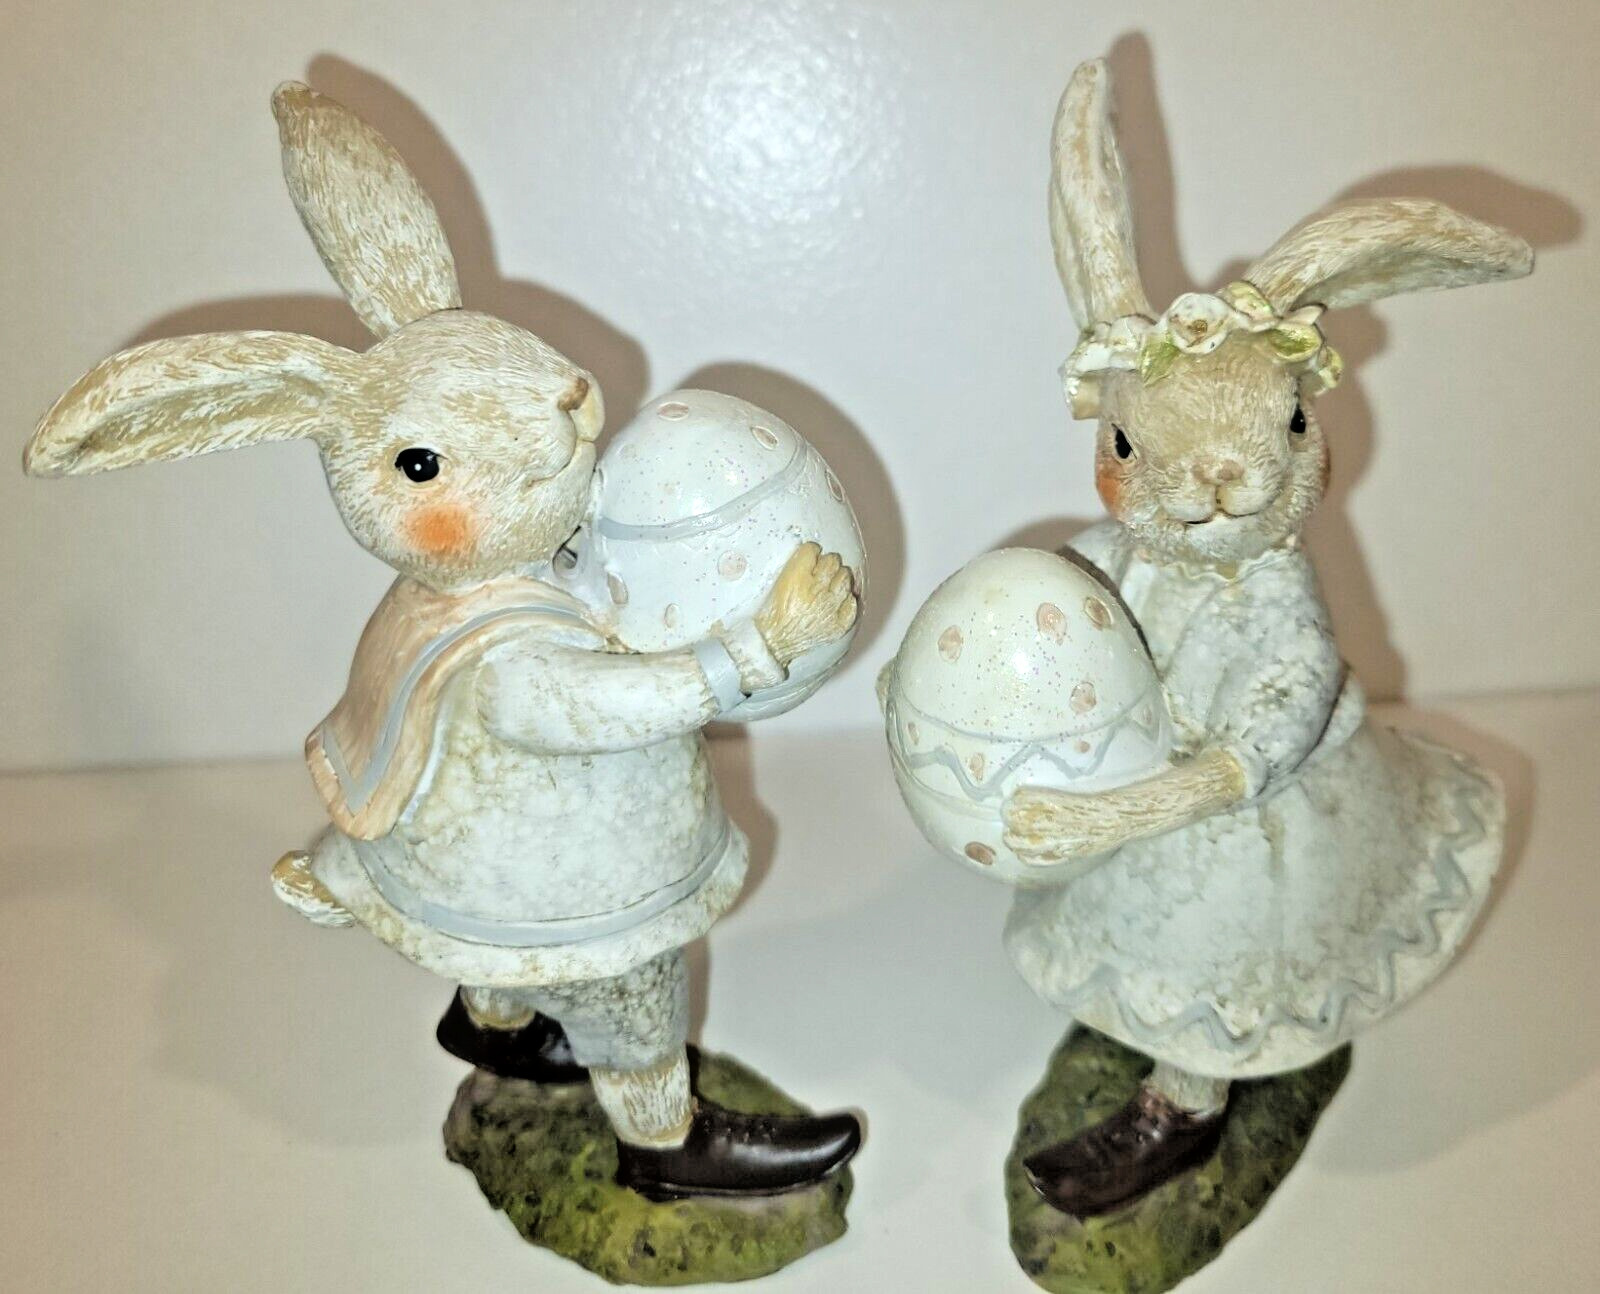 Bunny Rabbits Carrying Easter Eggs Fine Collectables -Set of 2 Figurines Vintage